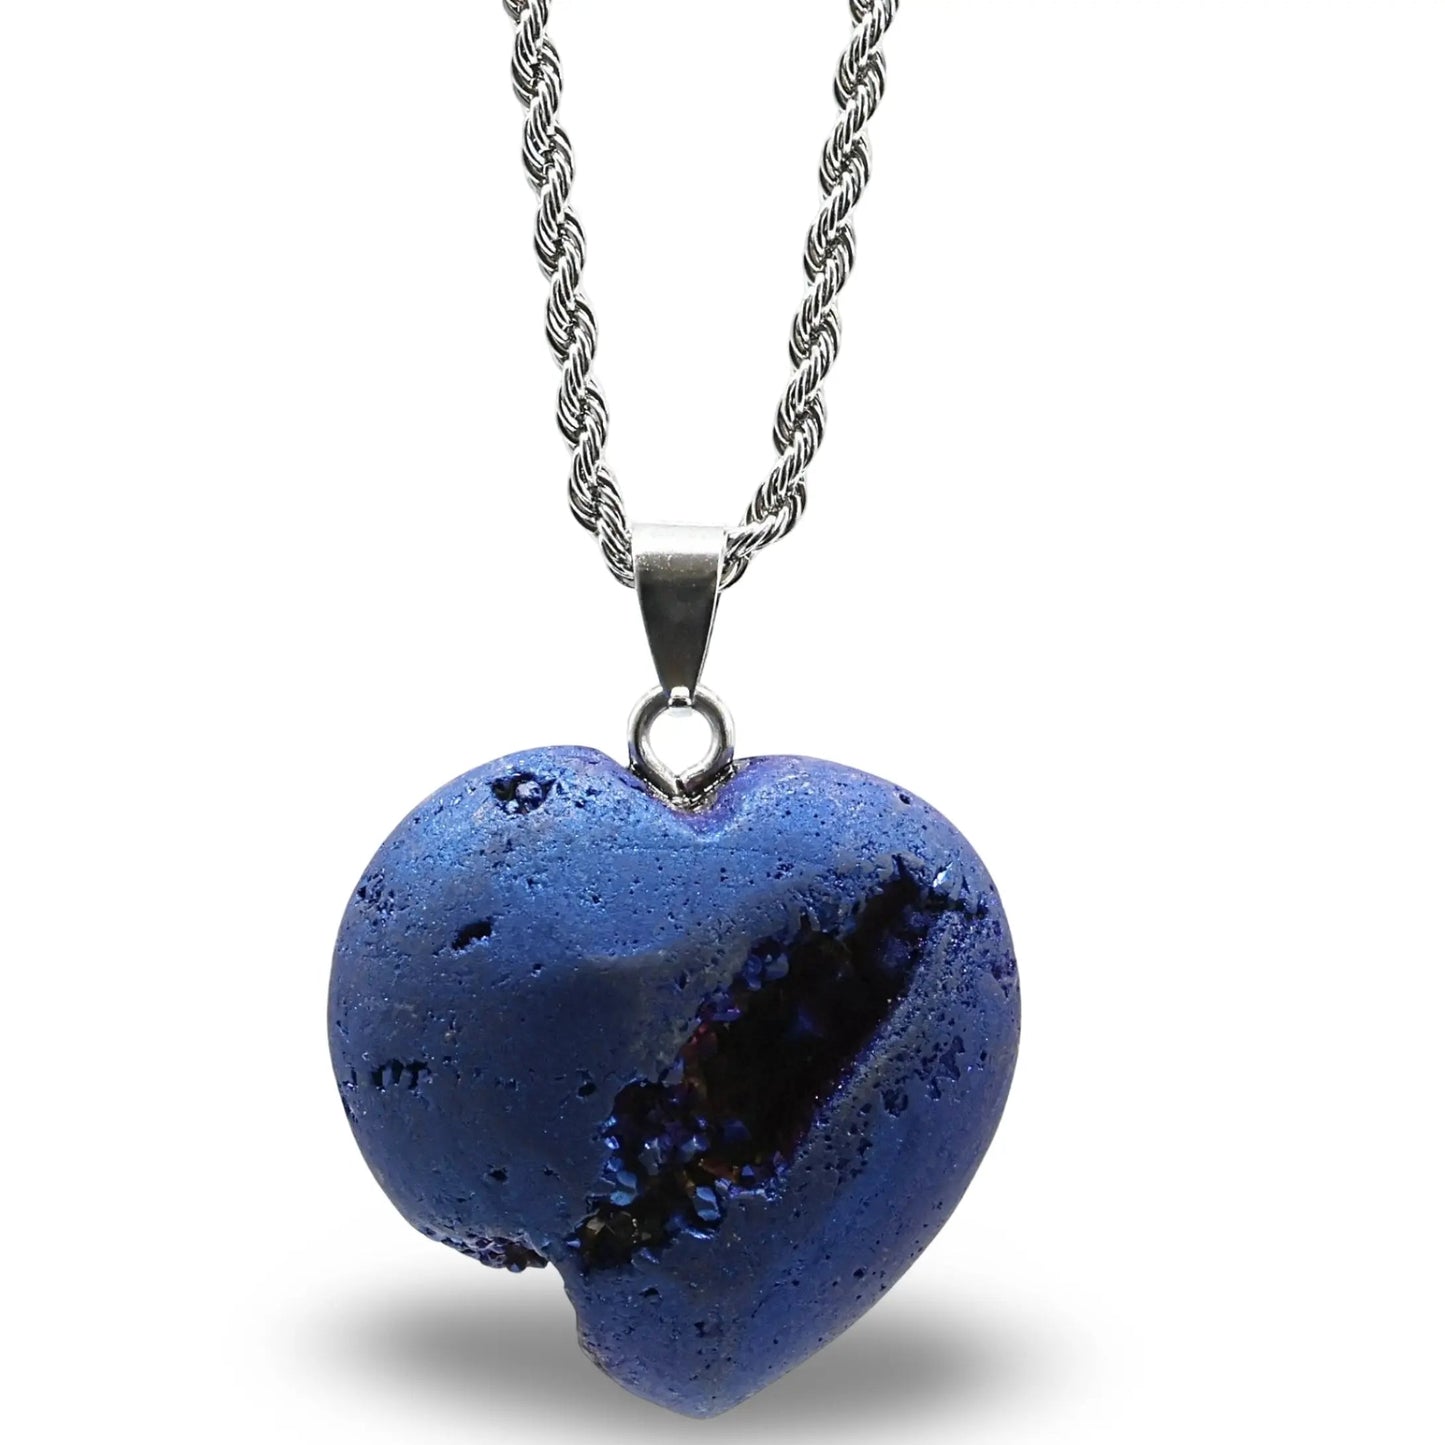 Necklace - Heart Shaped - Electroplate Natural Druzy Geode Agate -Electroplate Natural Druzy Geode Agate -Arômes & Évasions